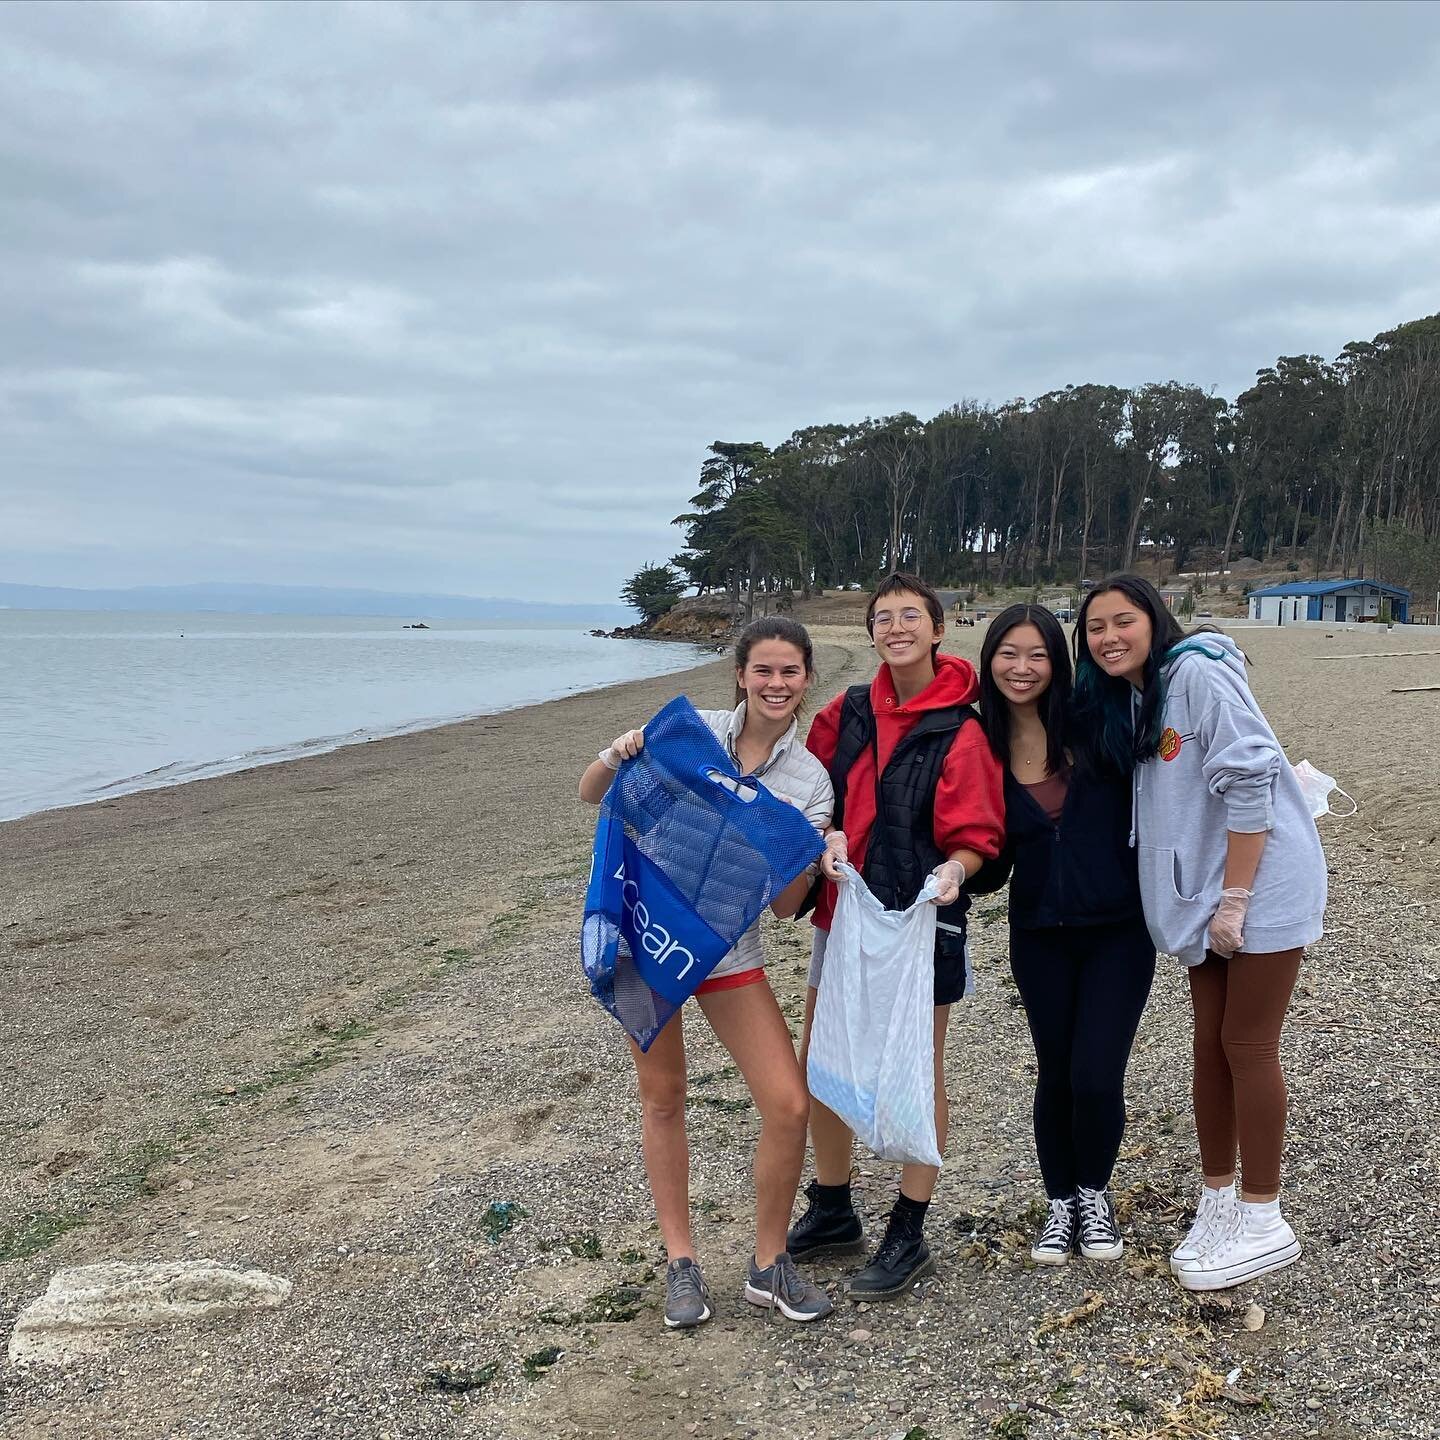 Thank you so much to everyone who participated in CCA&rsquo;s second cleanup! As a group we picked up about 20 lbs of trash!! Save the date for our third cleanup next week on Sunday, Oct. 23rd from 12pm-1:30pm.